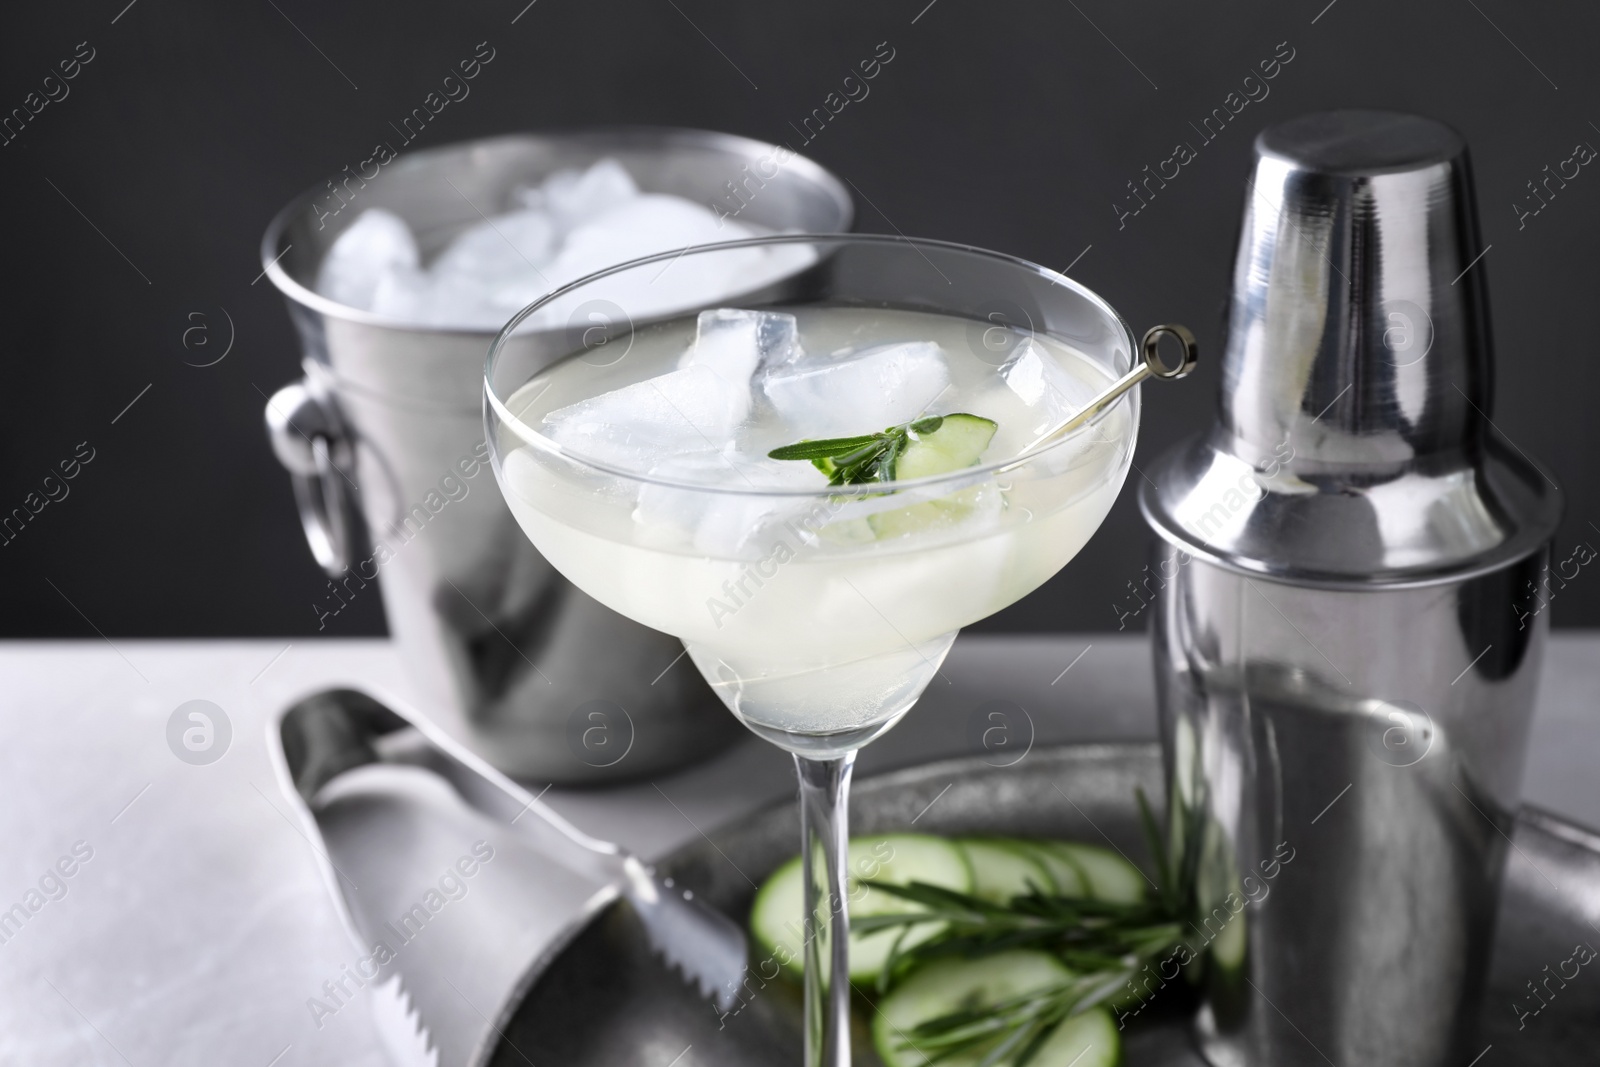 Photo of Glass of martini with cucumber, shaker and ice bucket on table against dark background